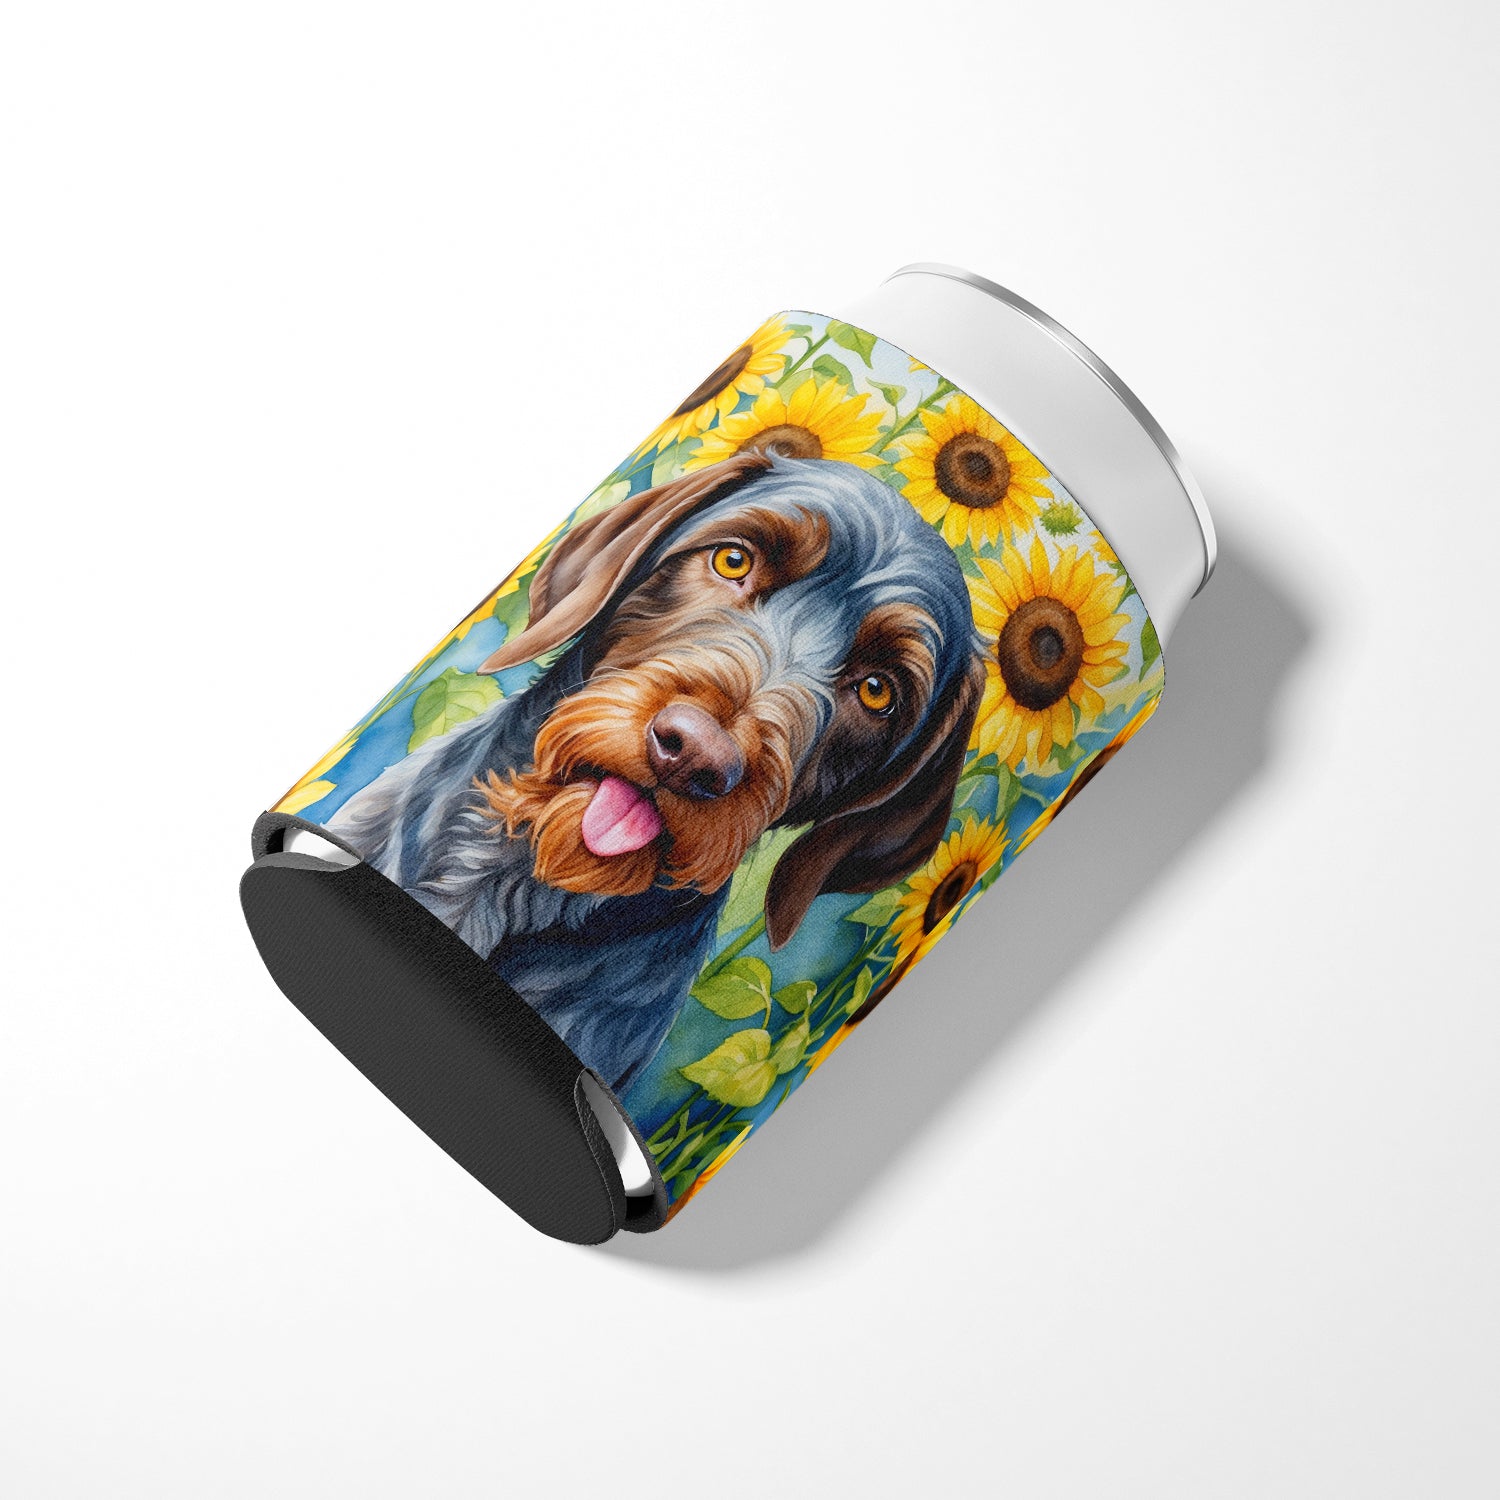 German Wirehaired Pointer in Sunflowers Can or Bottle Hugger